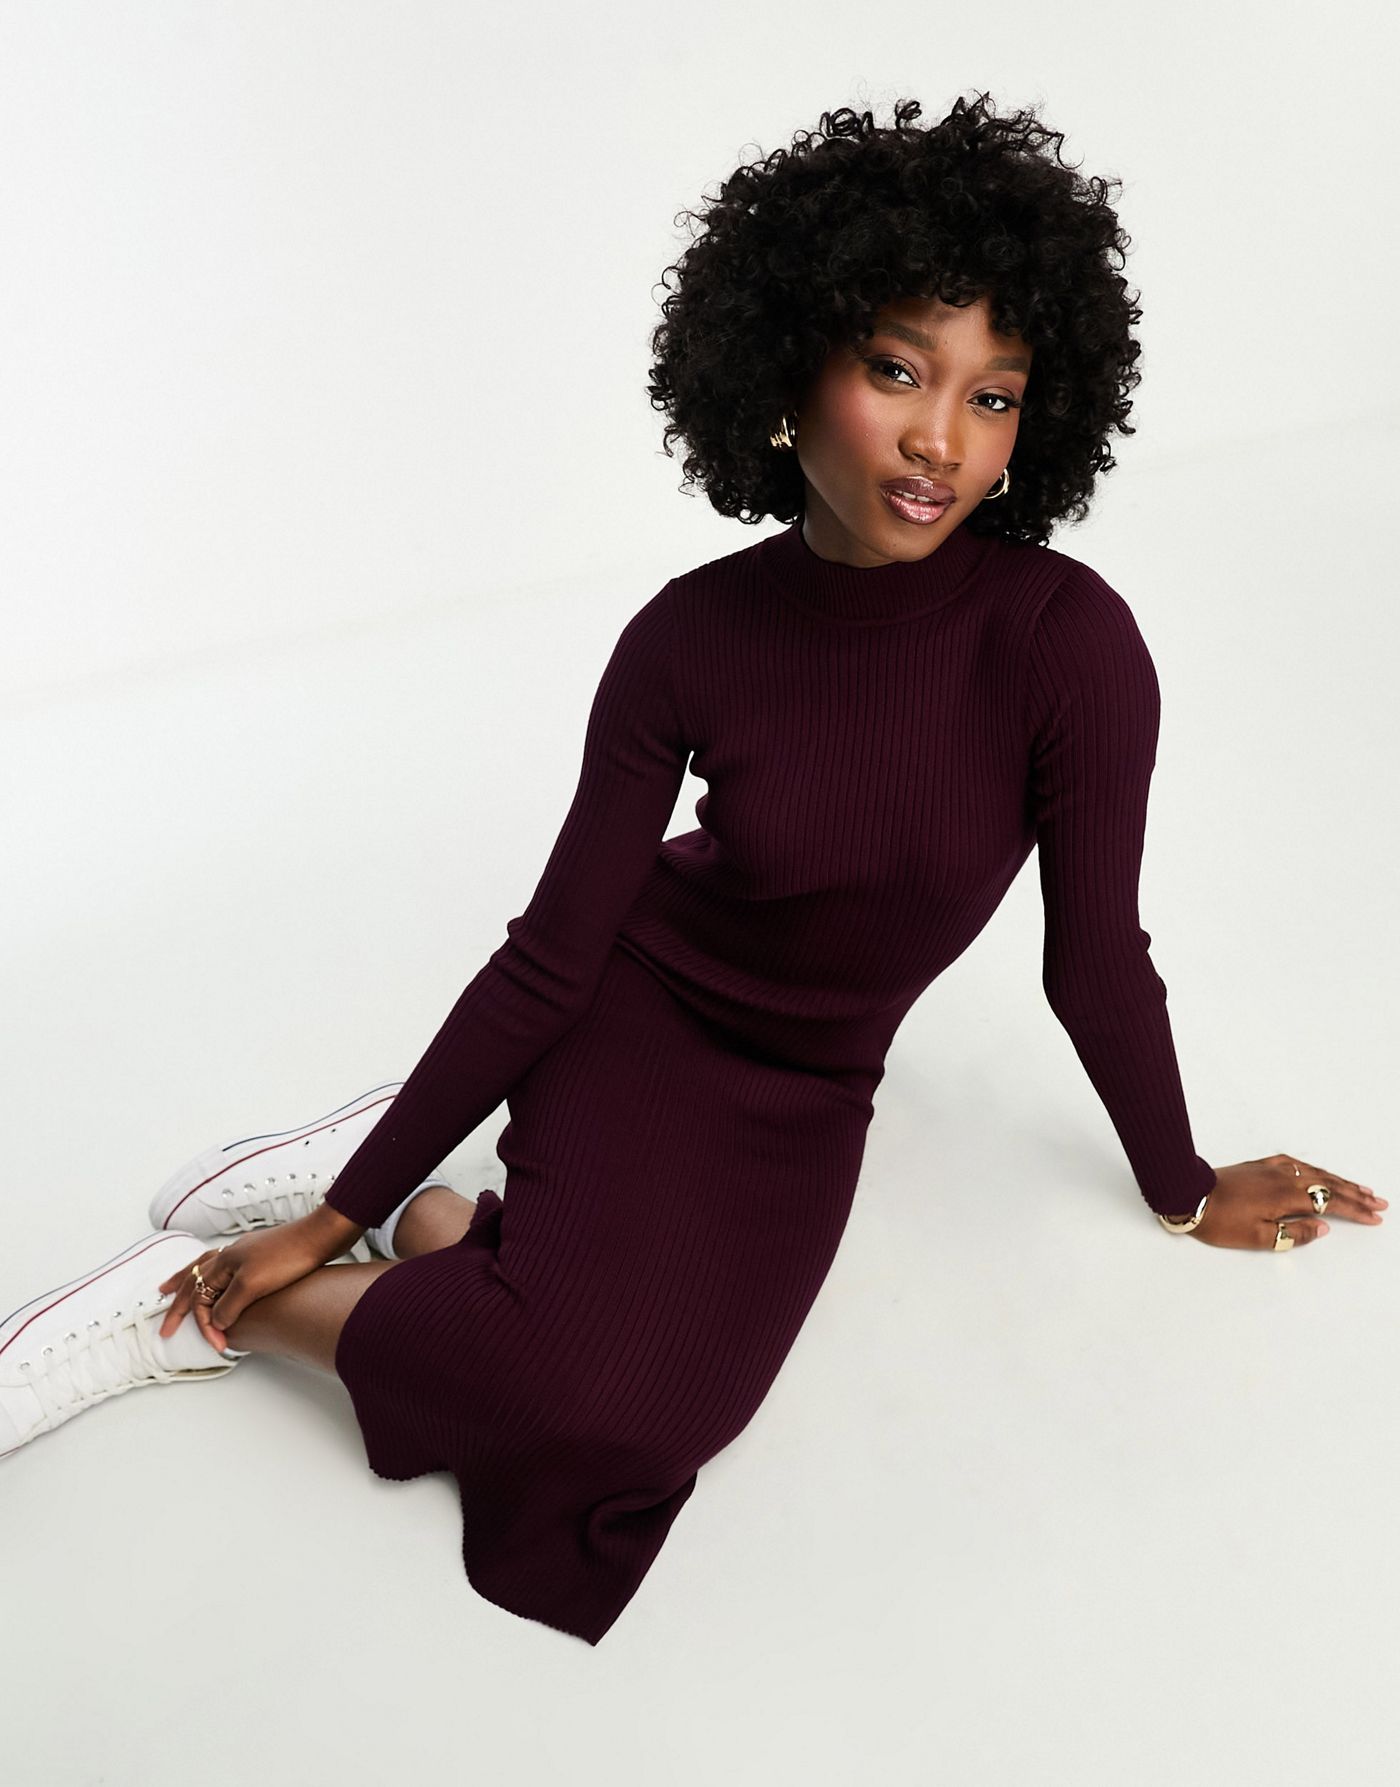 New Look ribbed knitted dress with side split in burgundy